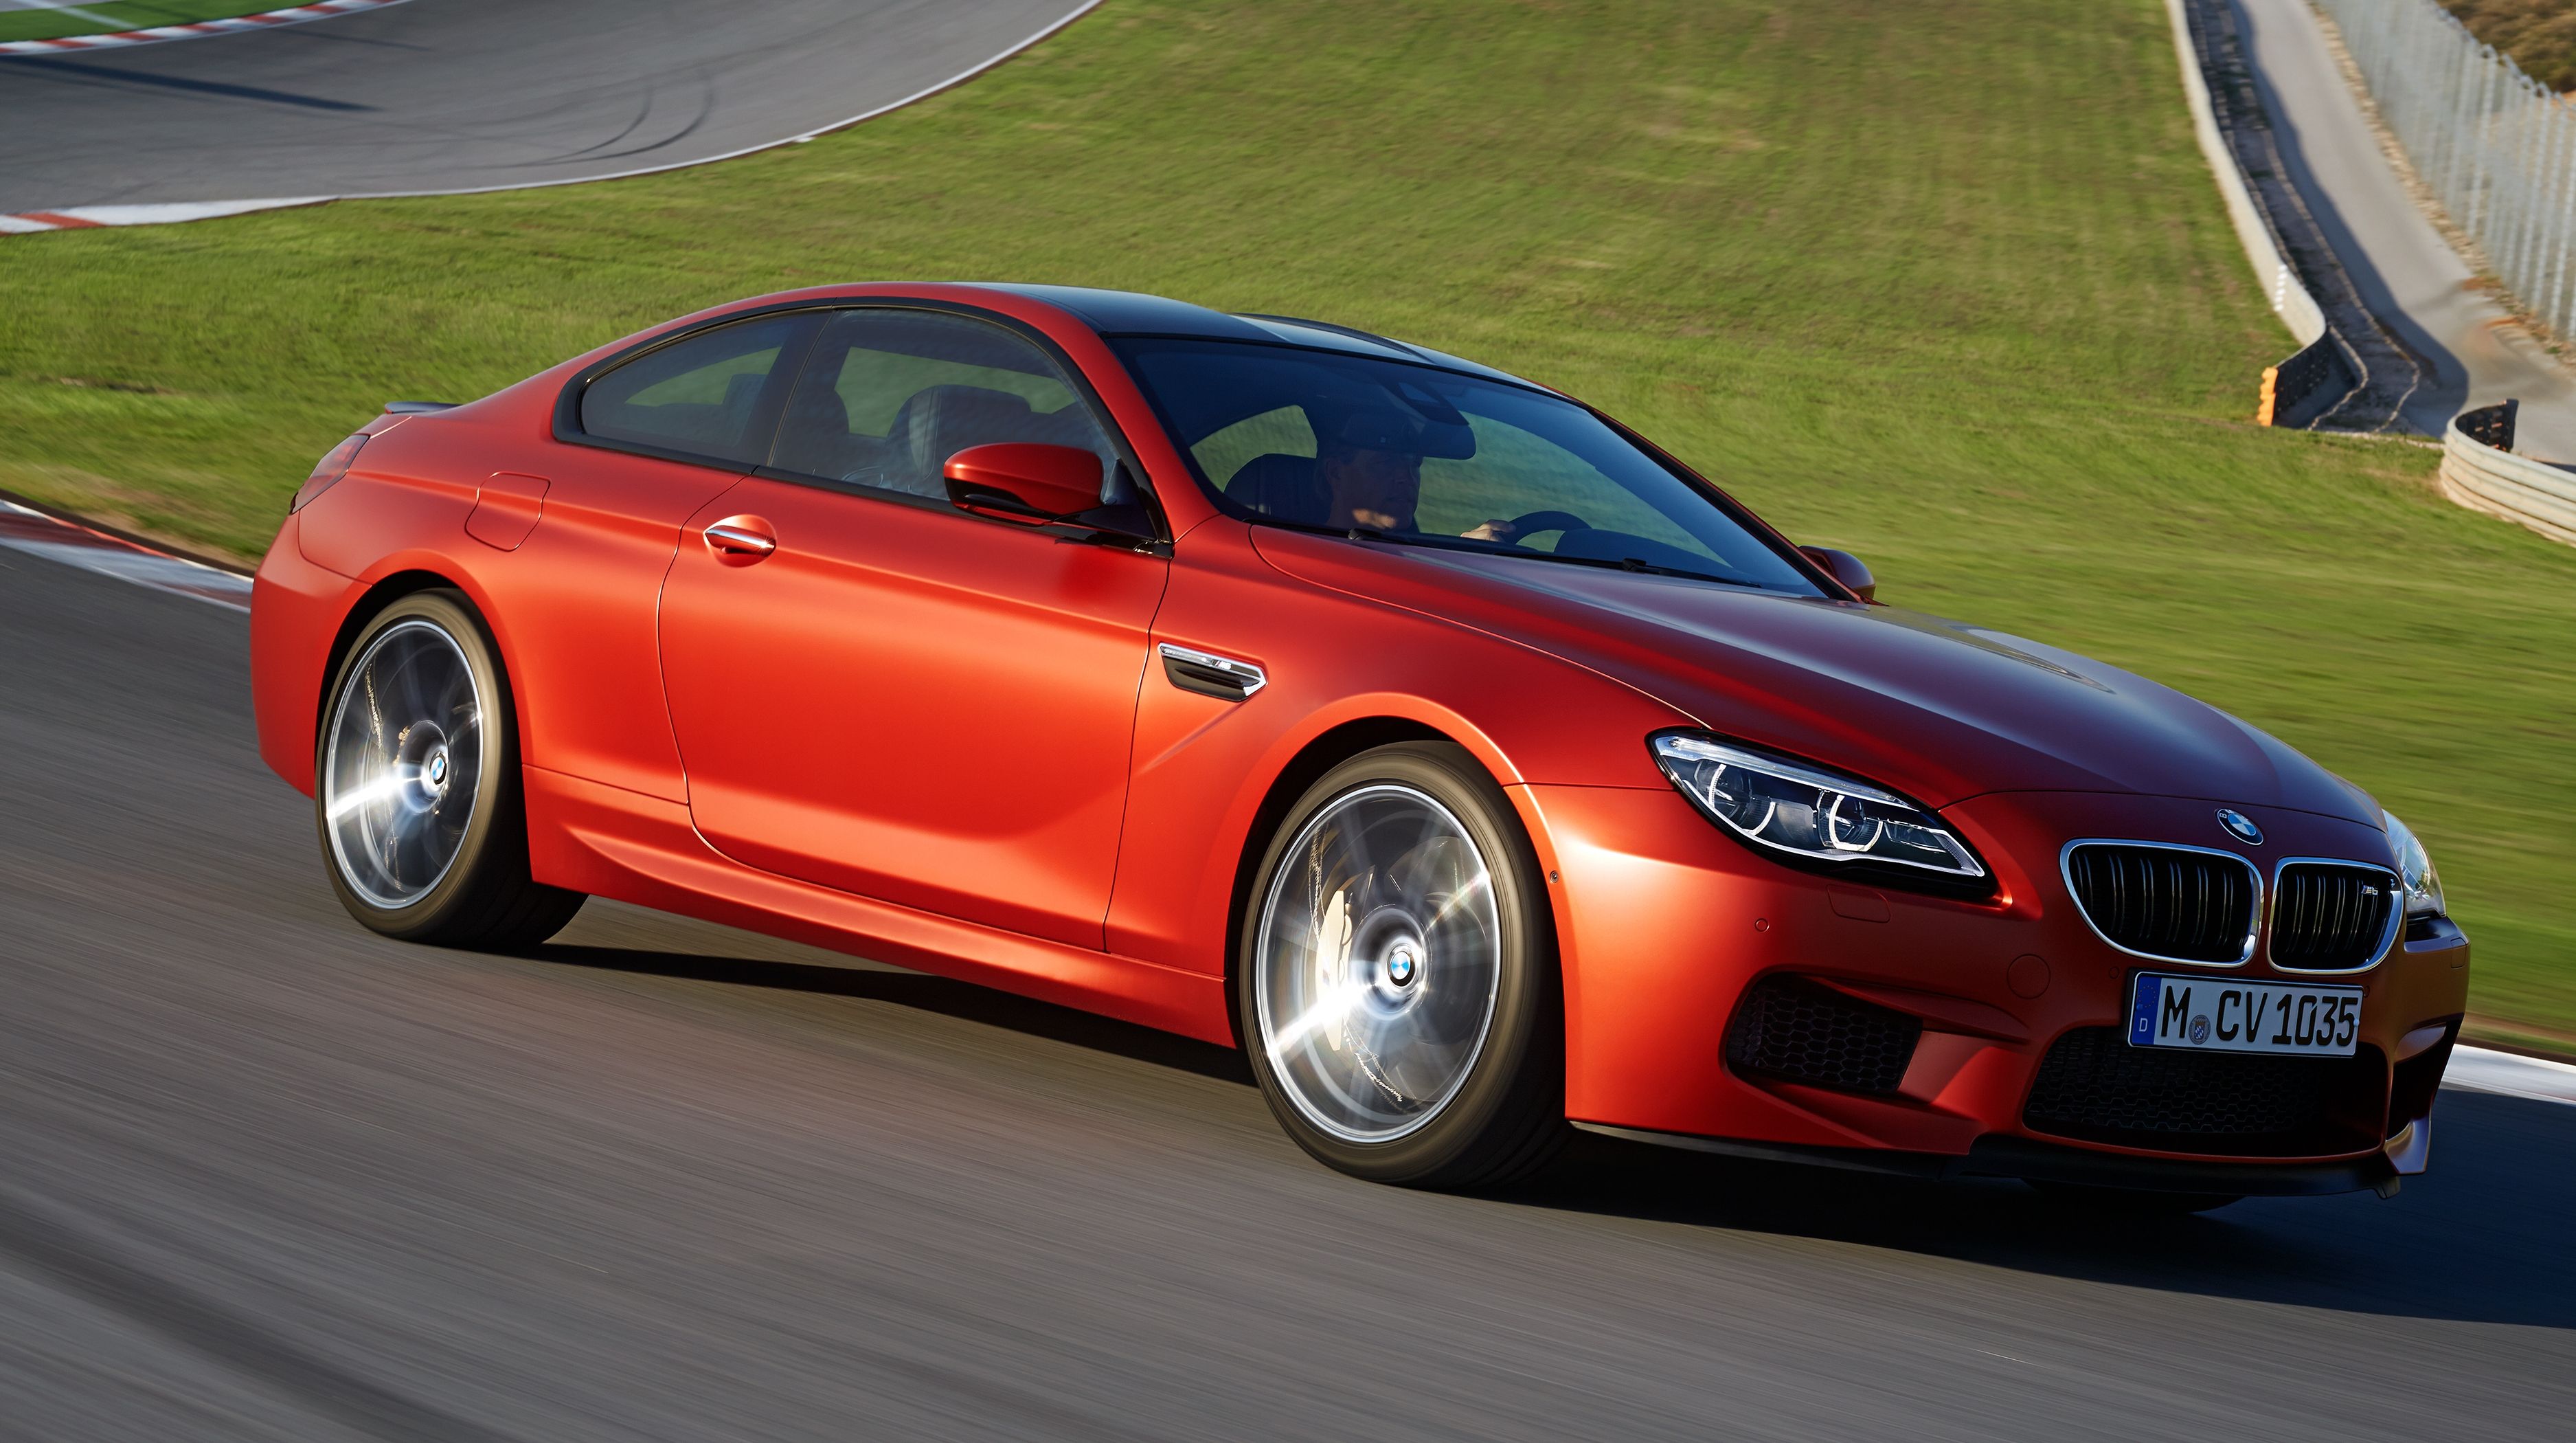  The BMW M6 makes its debut with a nip here and a tuck there.